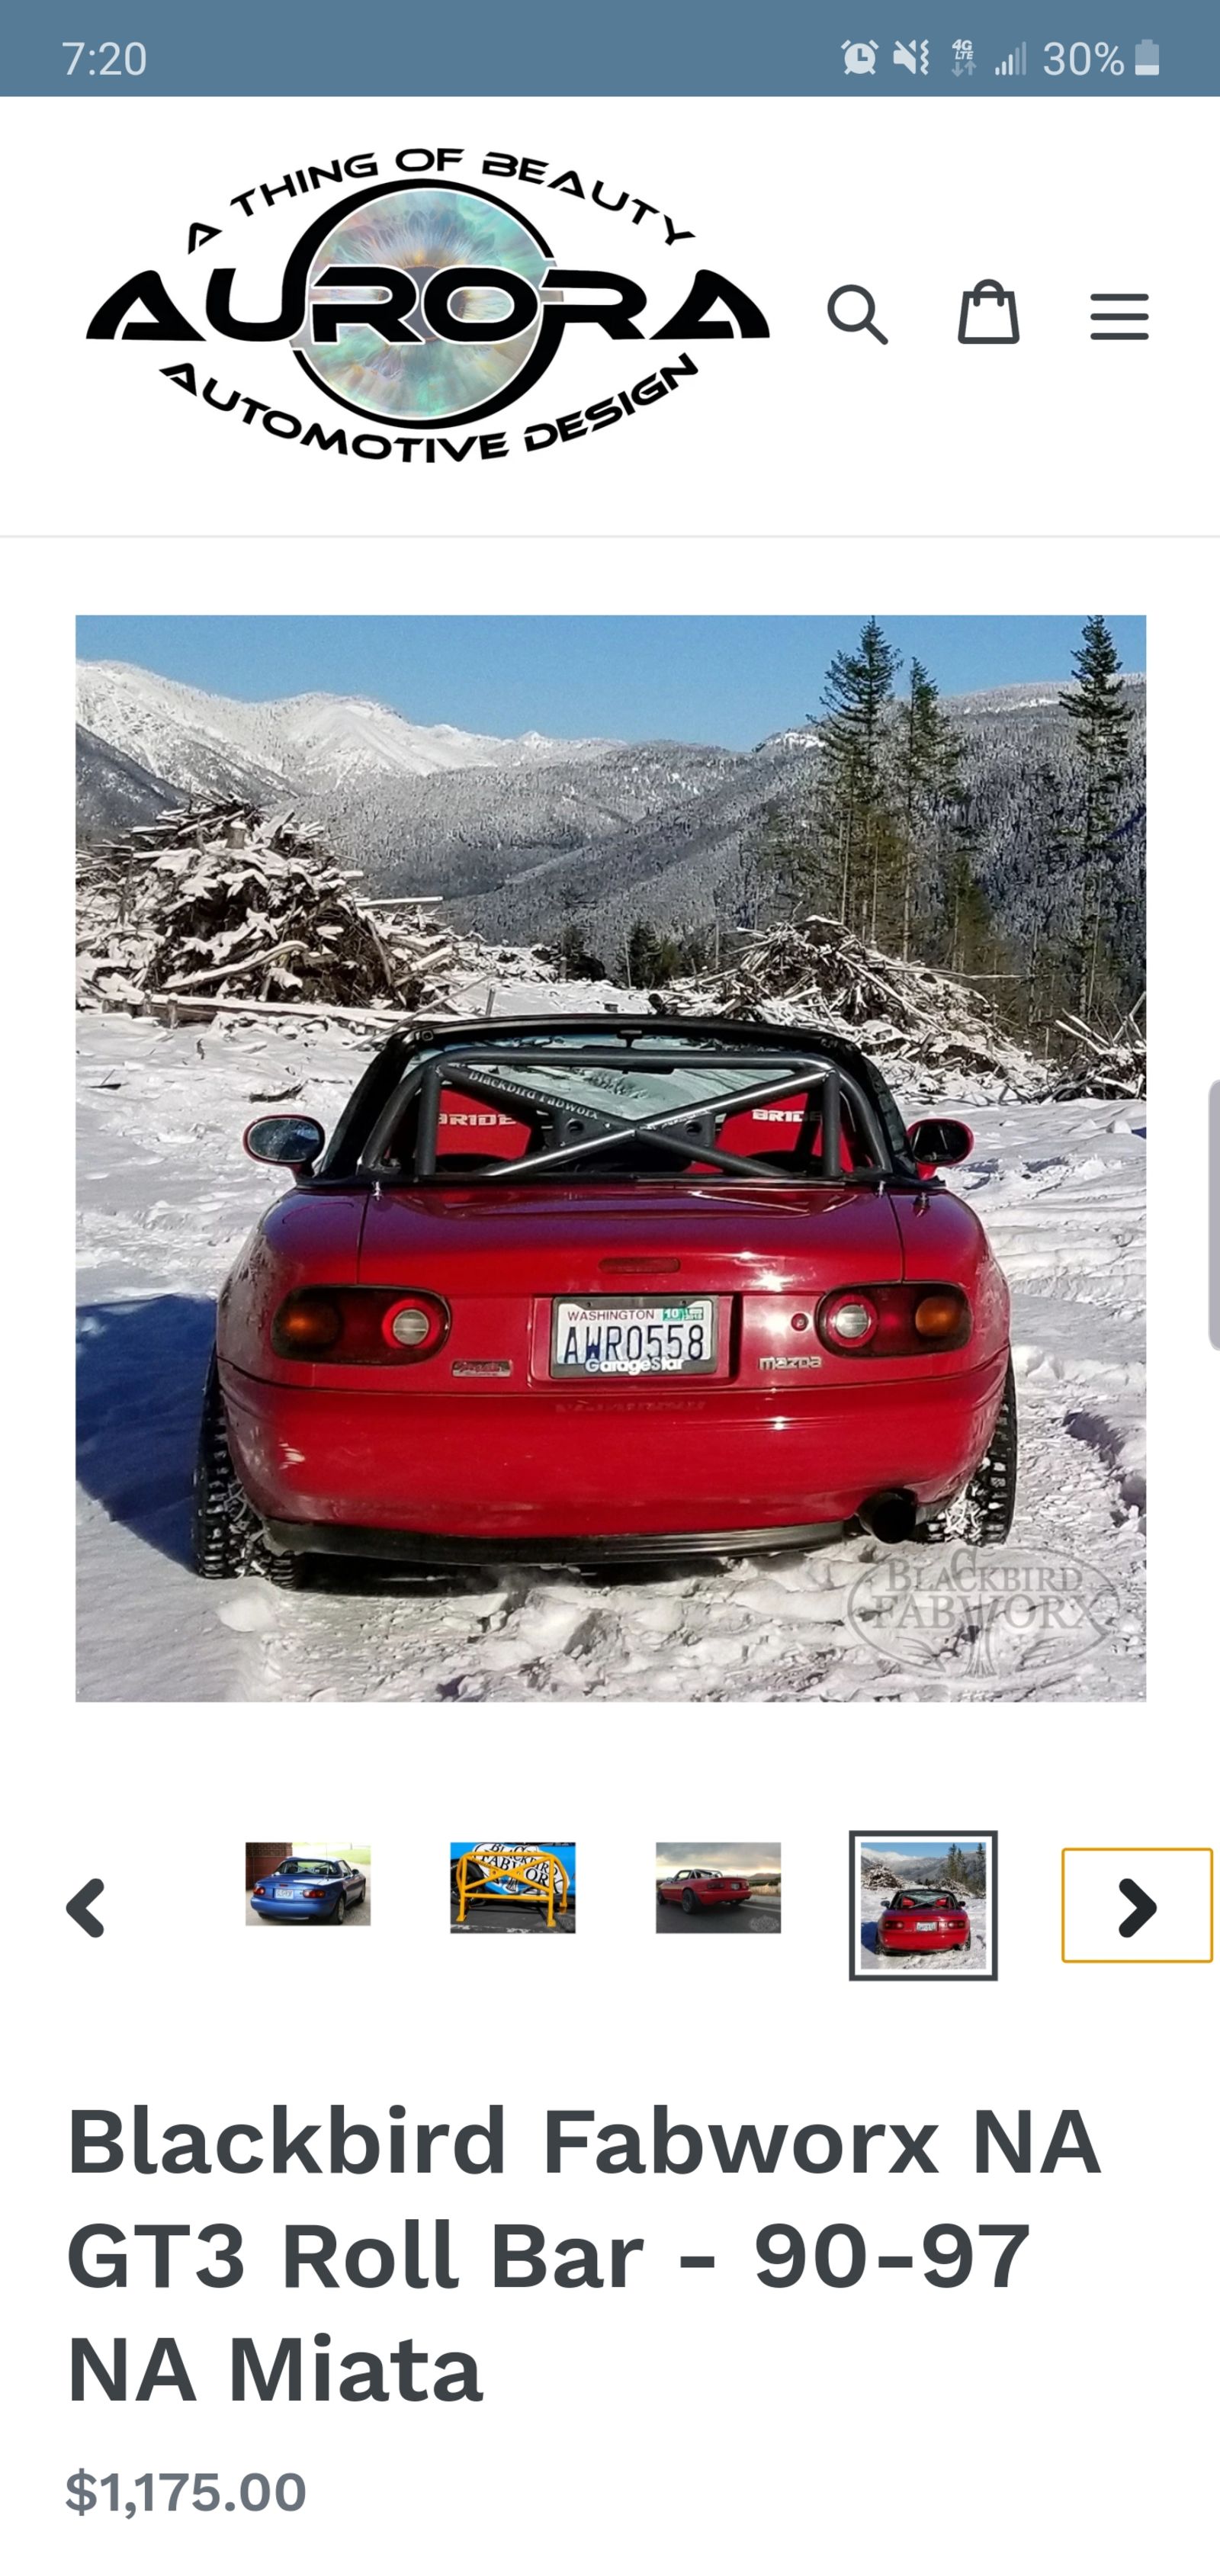 Illustration for article titled One of my favorite brands is using one of my favorite pictures of my Miata on their website *faints*